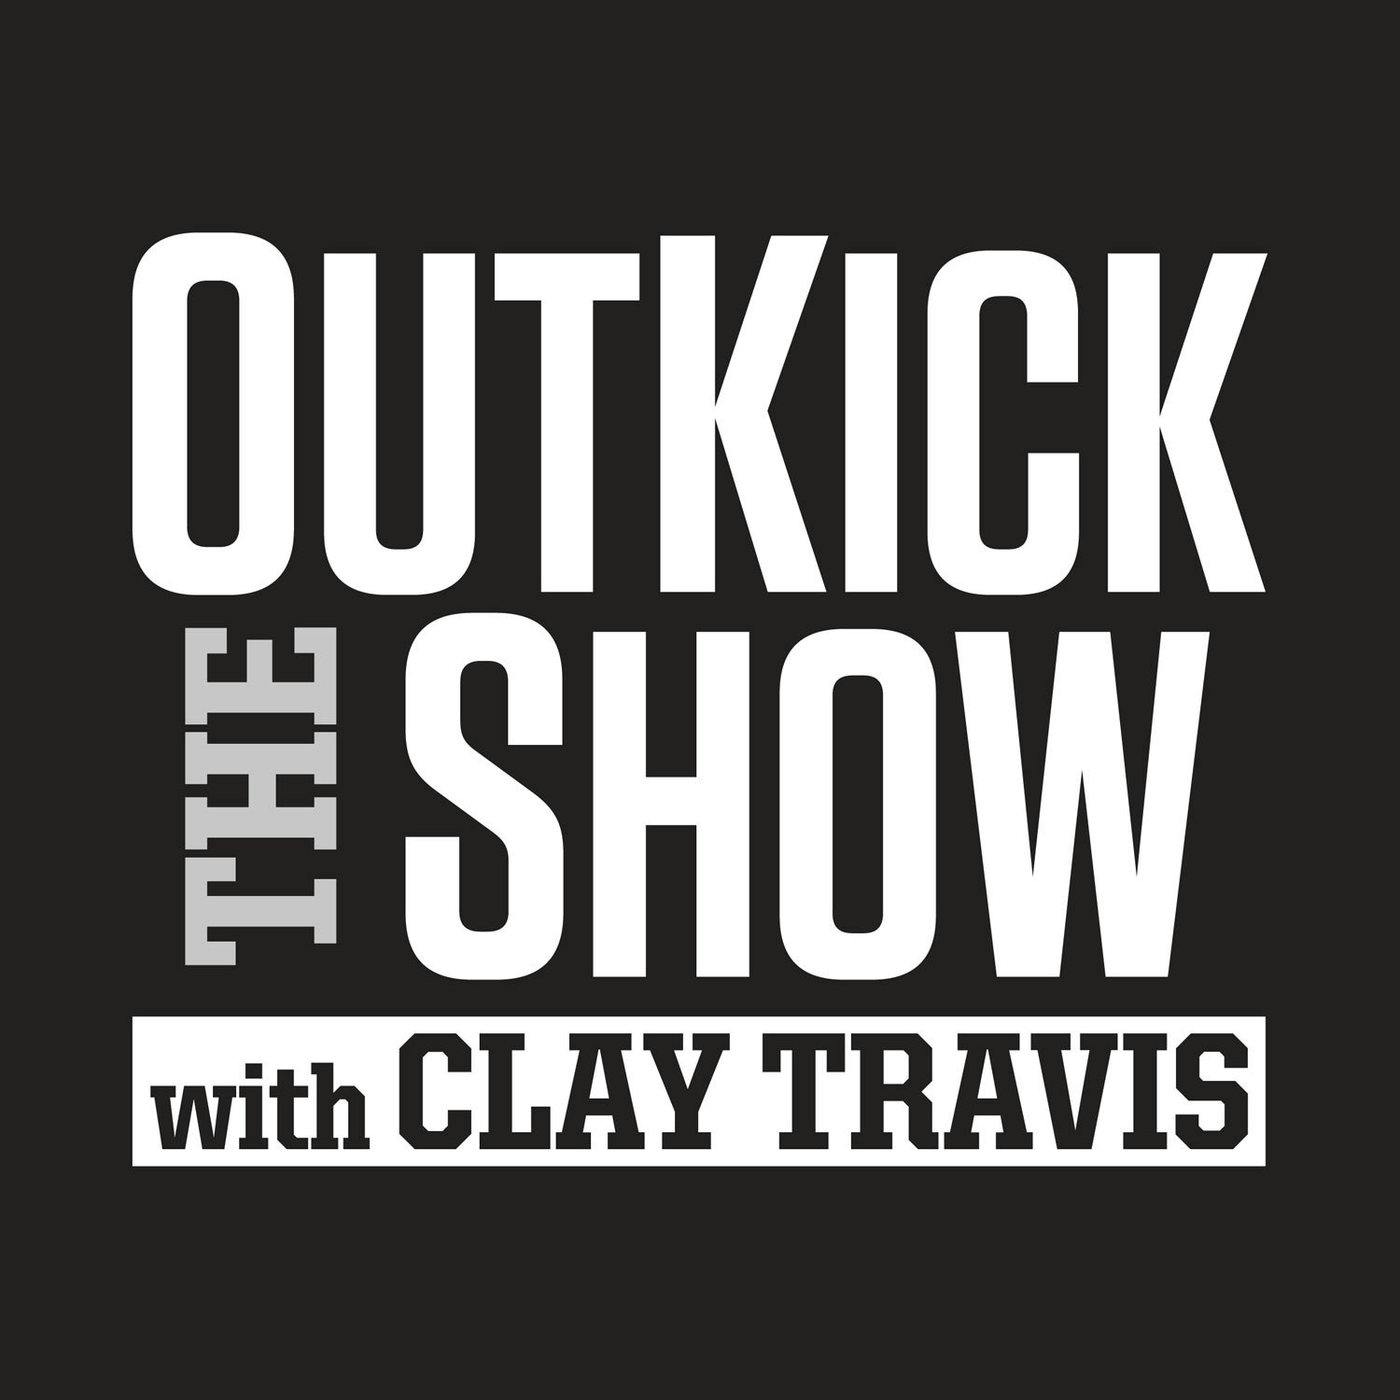 Outkick CFB top ten, Penn State rolls, Bama survives, UCLA crumbles, SEC power rankings, Lamar beats Mahomes, NFL reactions, Titans win in Seattle, Emmy's hypcocrisy, San Fran mayor lunacy, NYC rules 